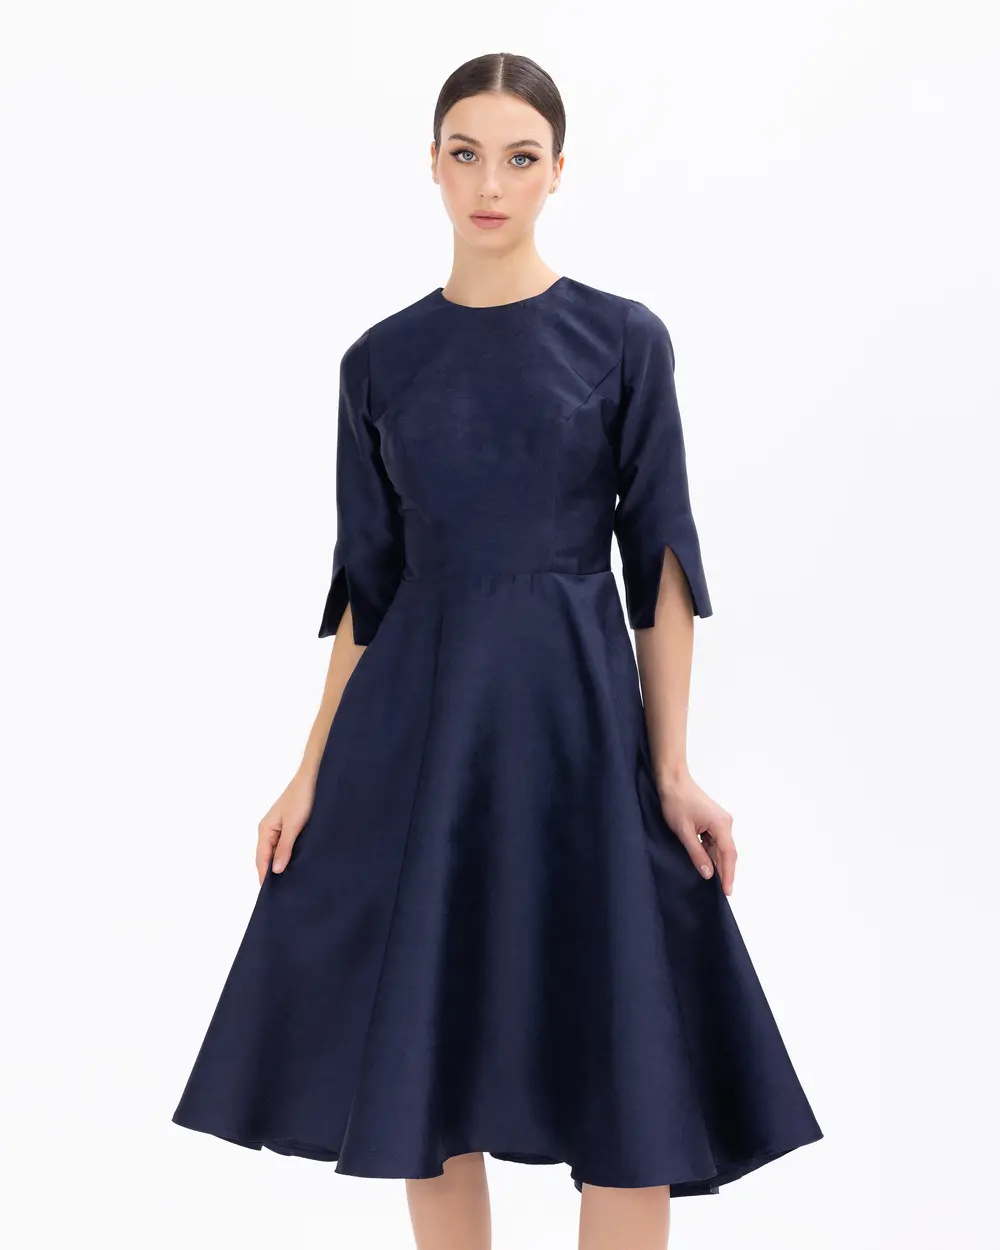 Stone Detailed A Form Evening Dress with Removable Collar